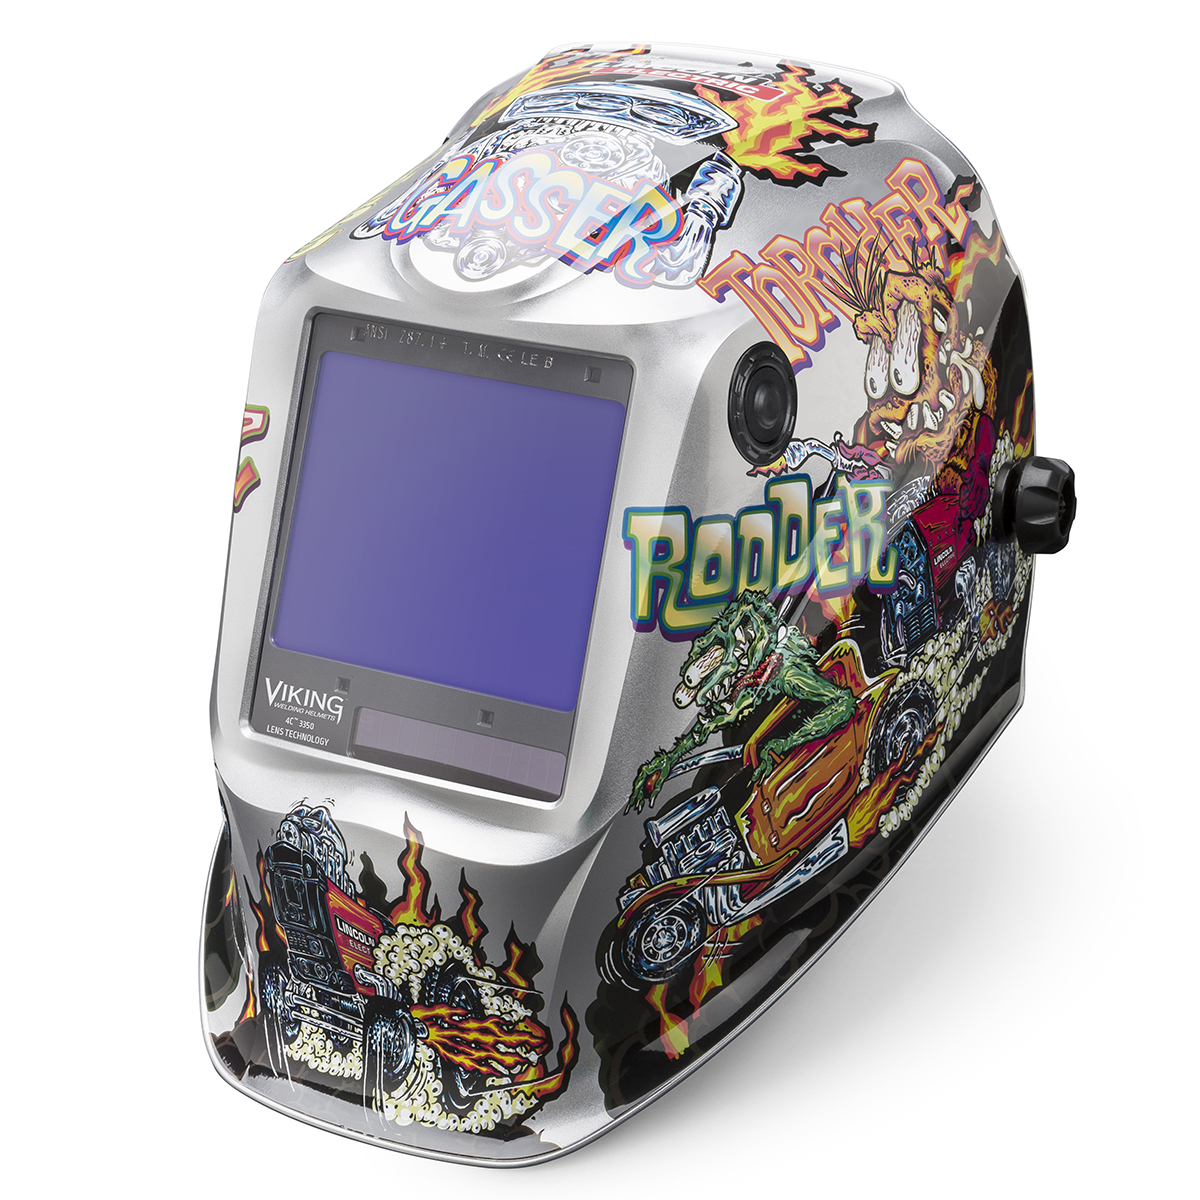 Lincoln Electric® VIKING® 3350 Multi-Color Welding Helmet With Variable Shades 5 - 13 Auto Darkening Lens, 4C® Lens Technology A